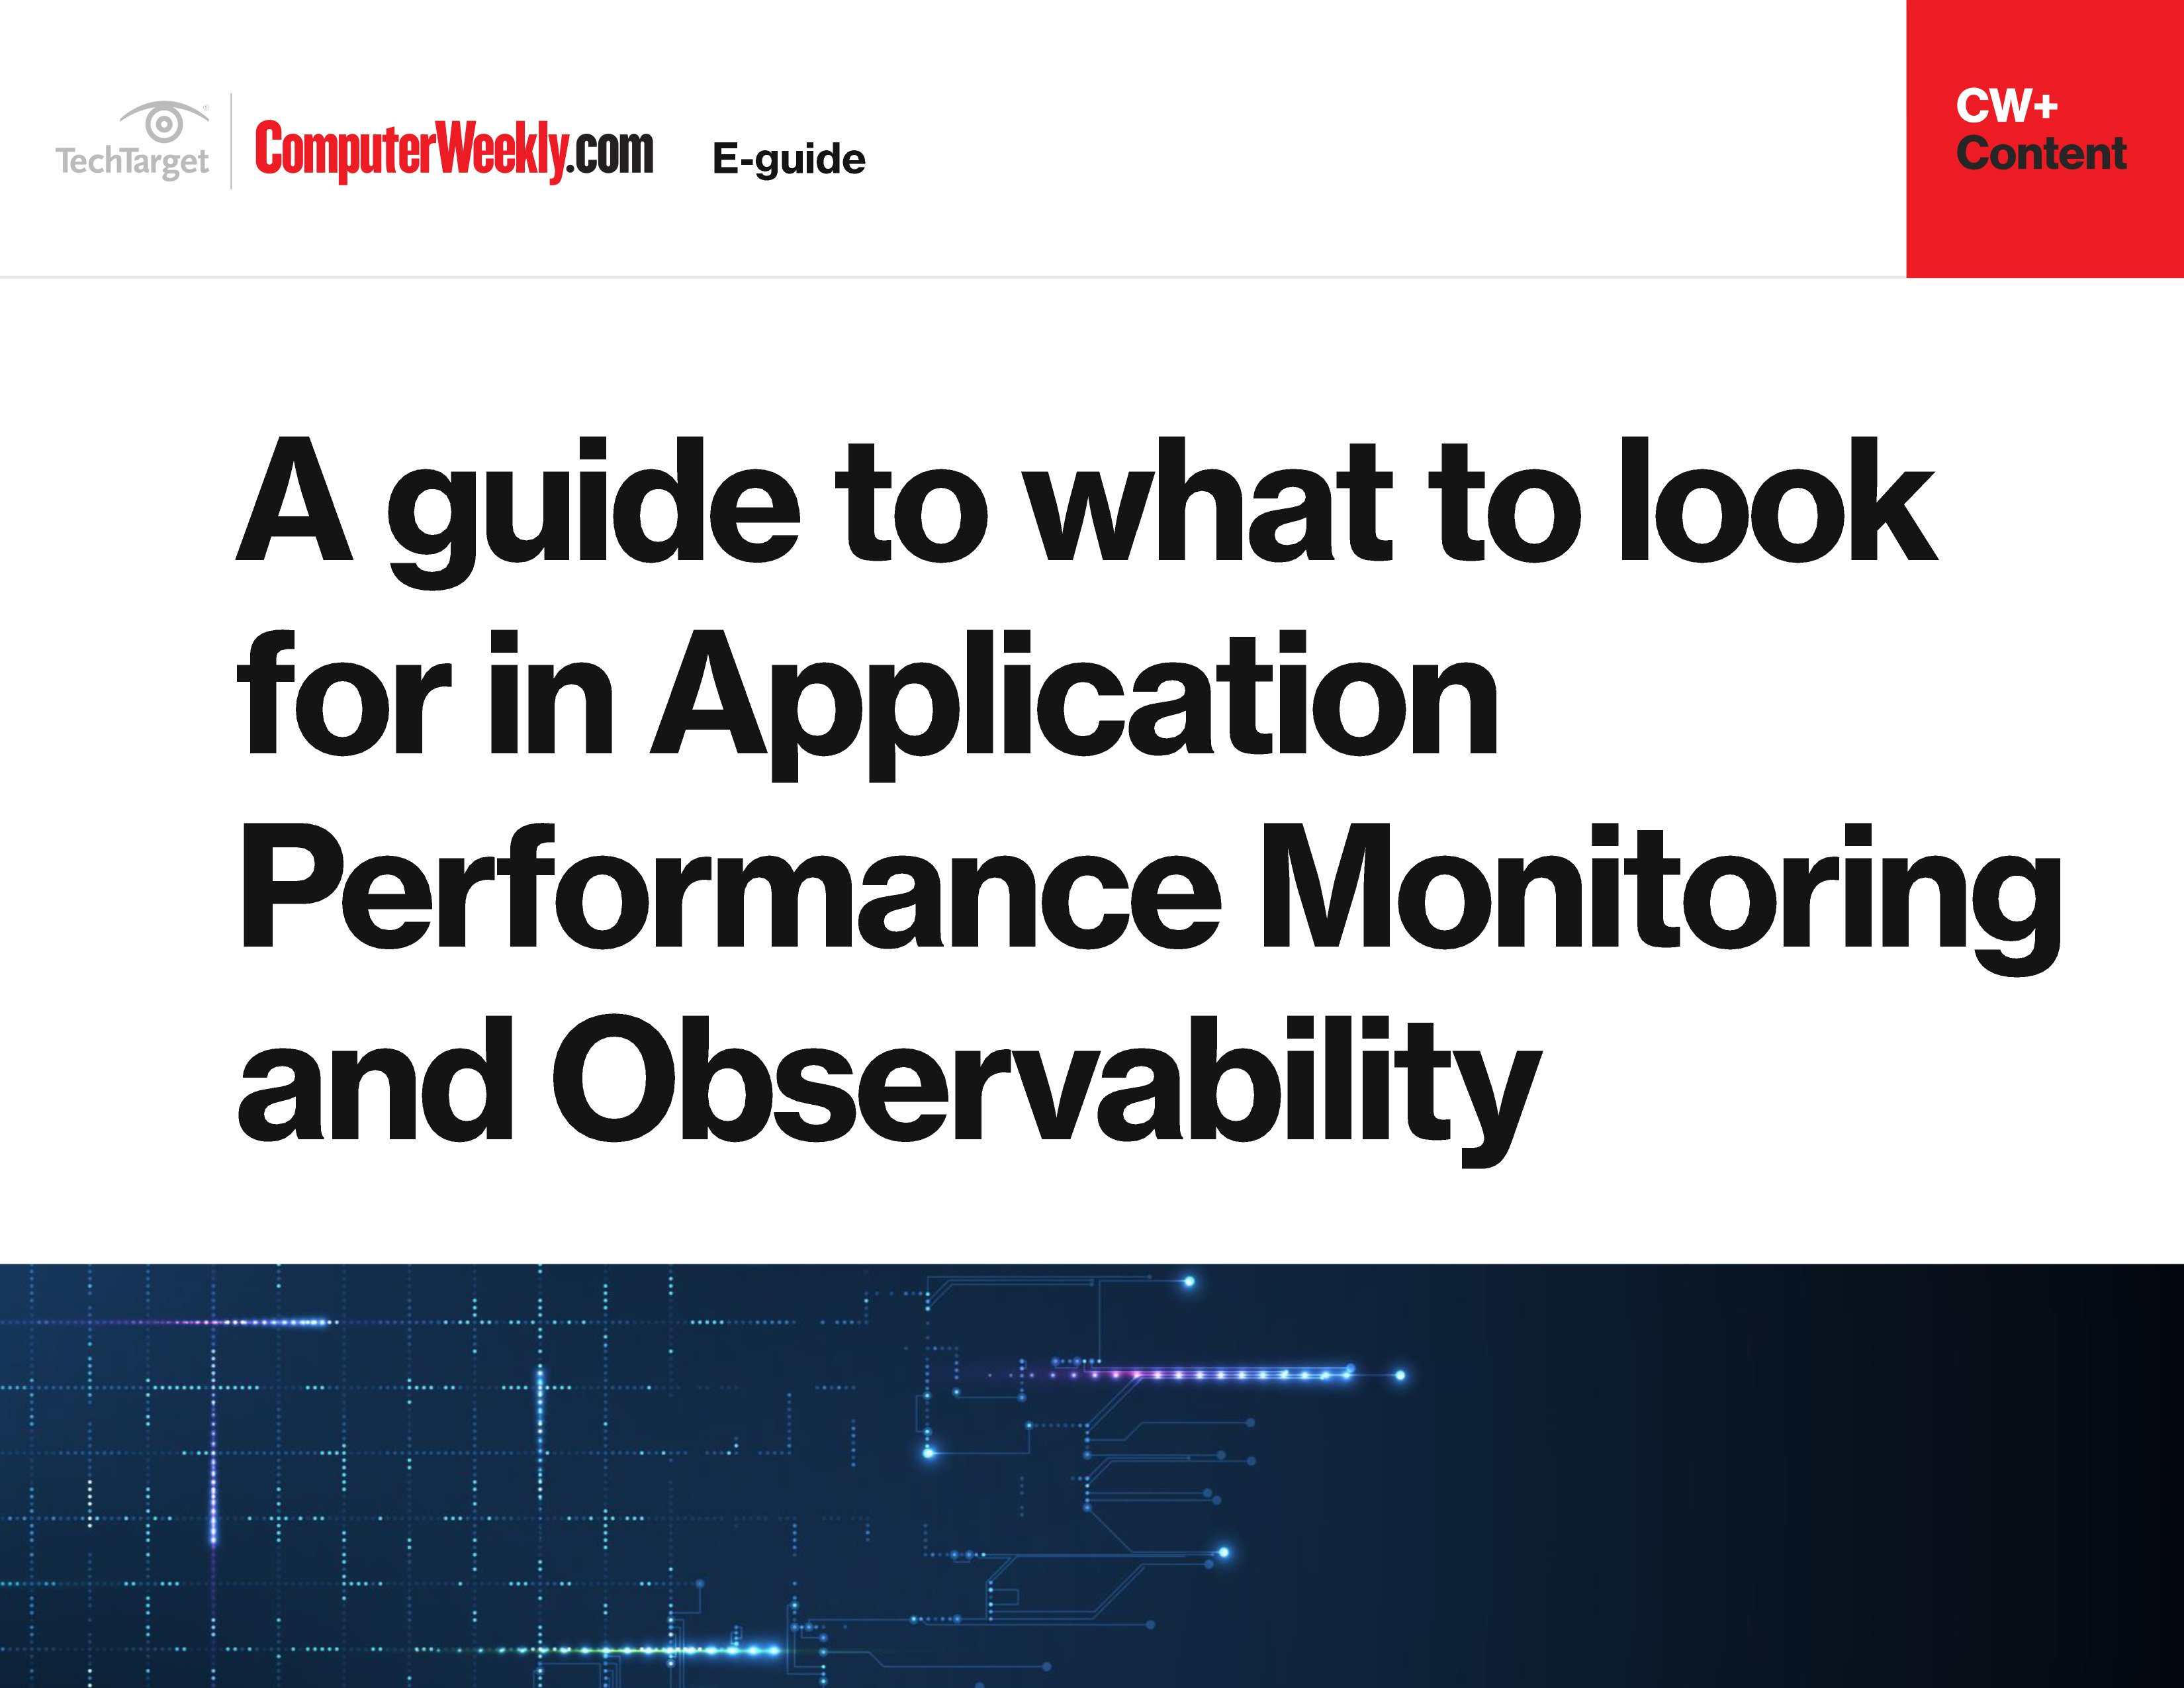 A guide to what to look for in Application Performance Monitoring and Observability